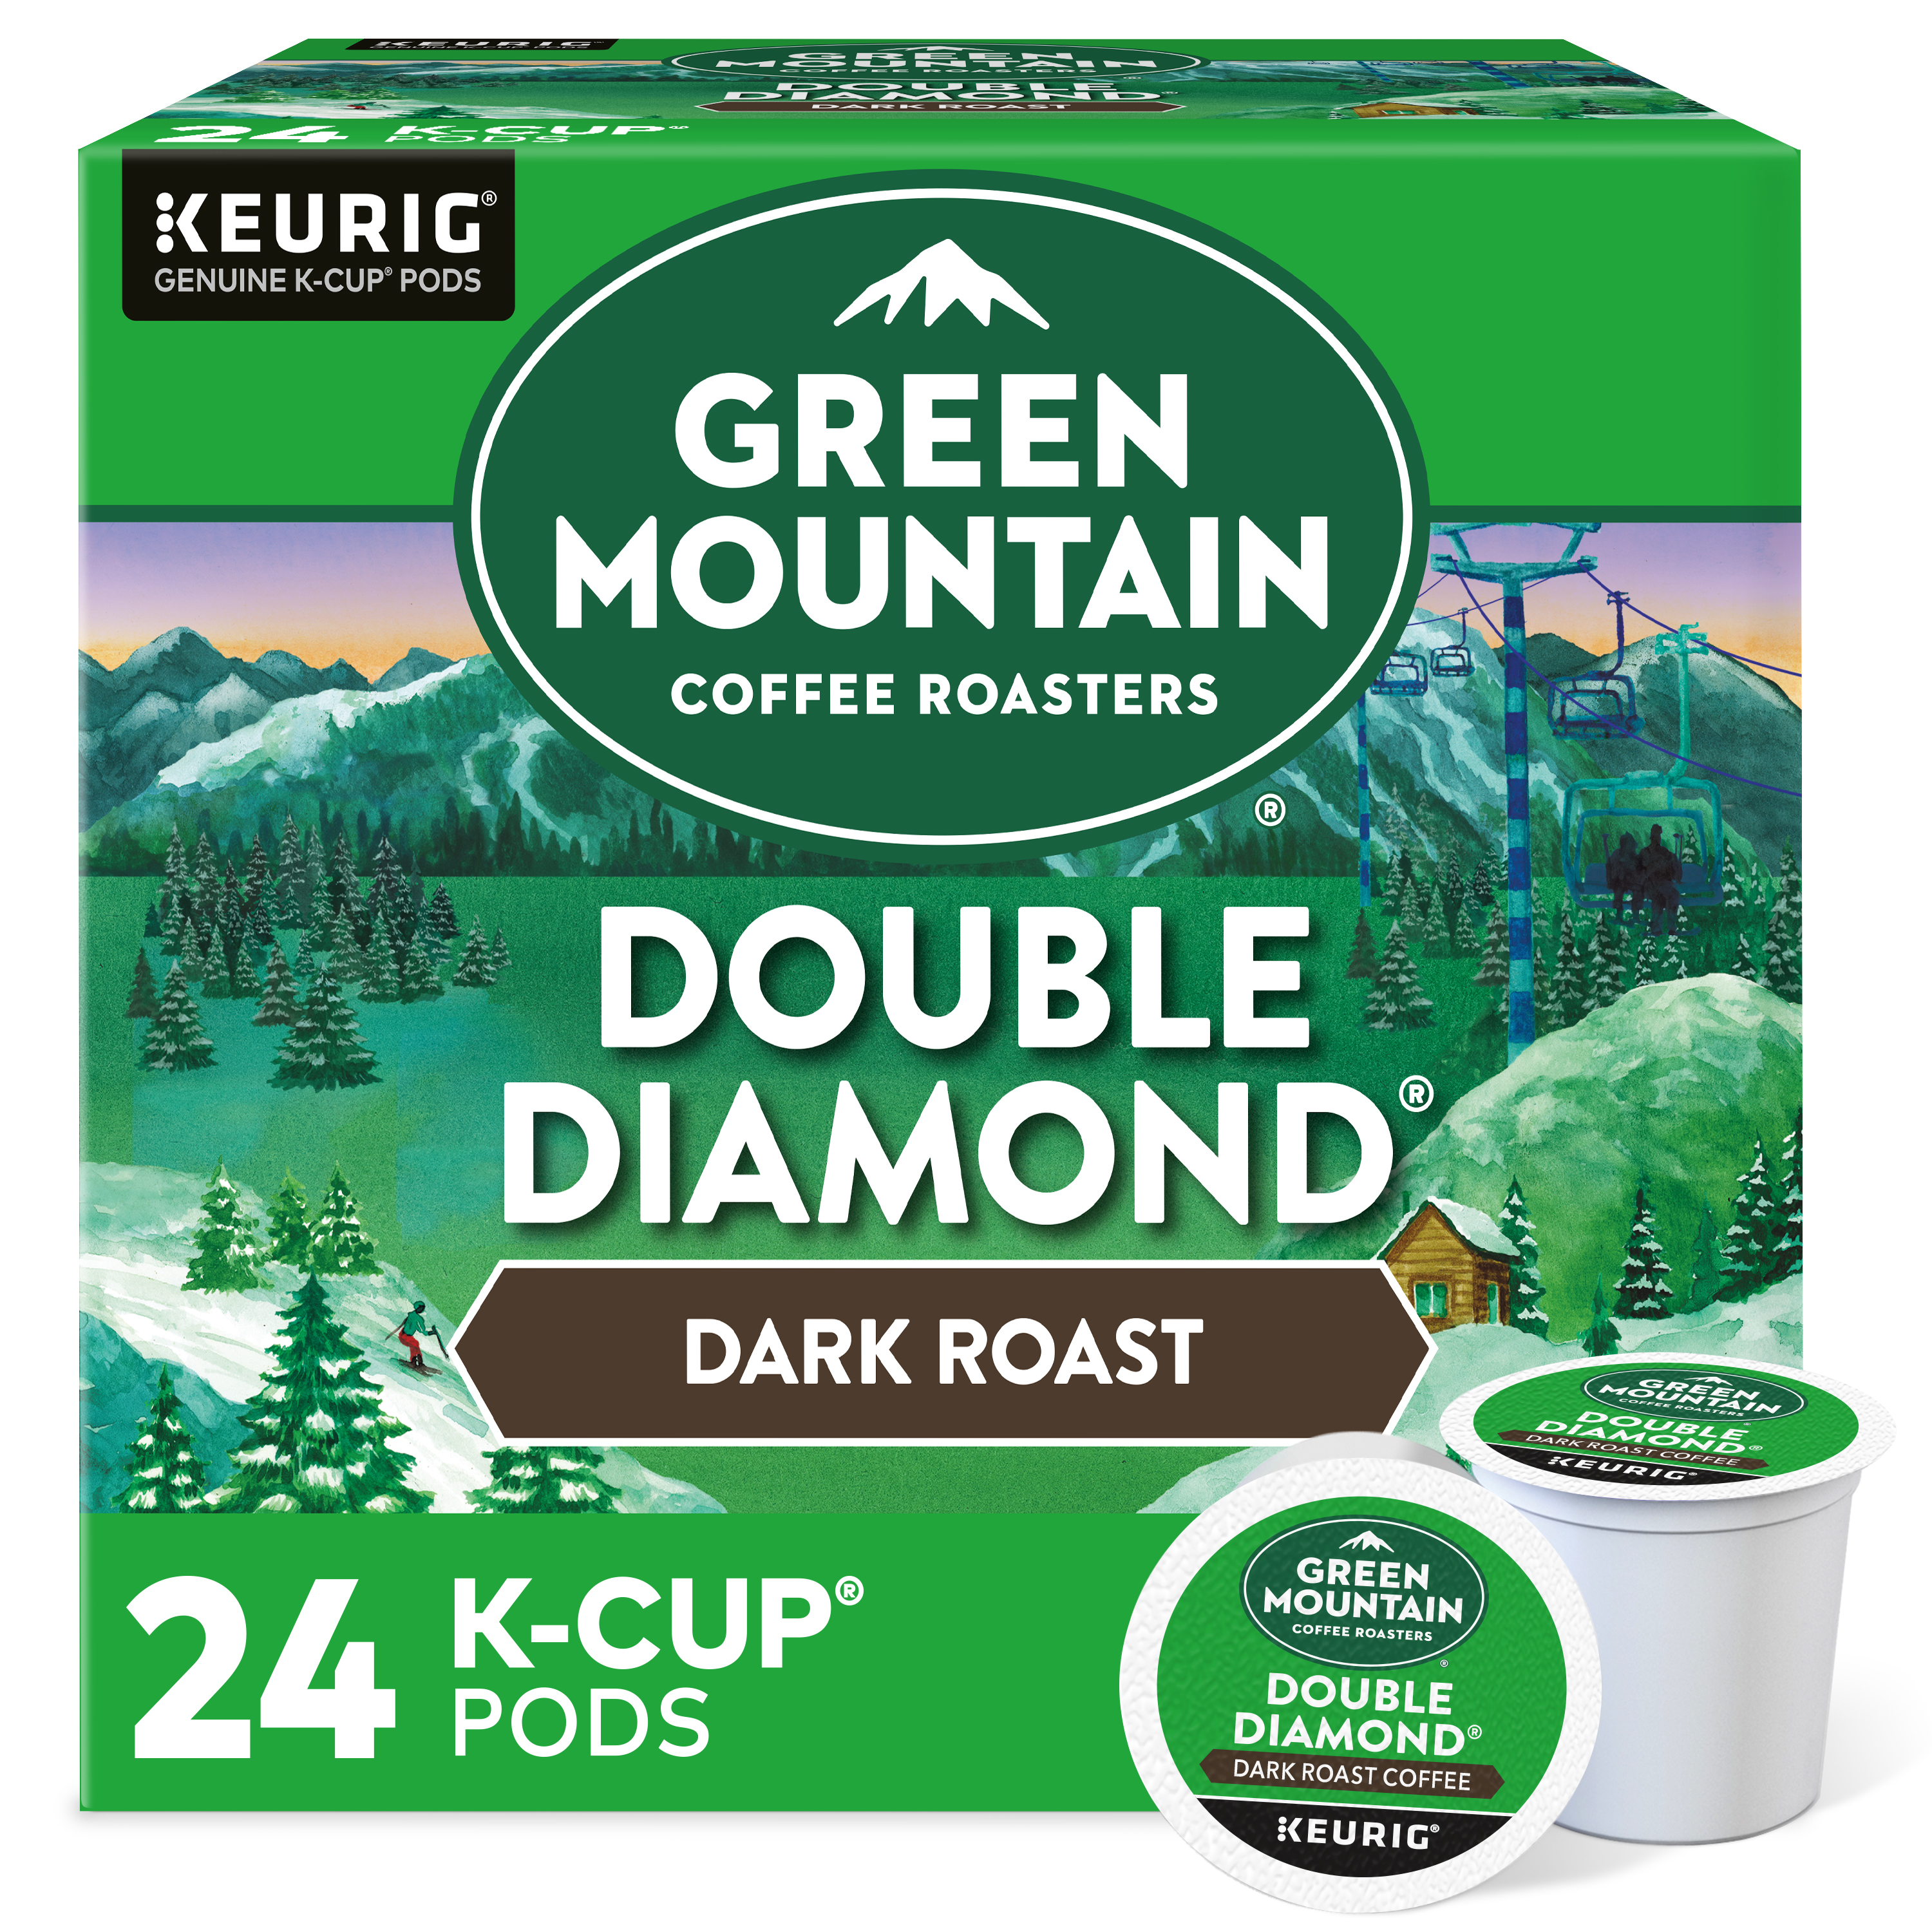 Keurig Coffee Pods K-Cups 16   18   22   24 Count Capsules ALL BRANDS FLAVO